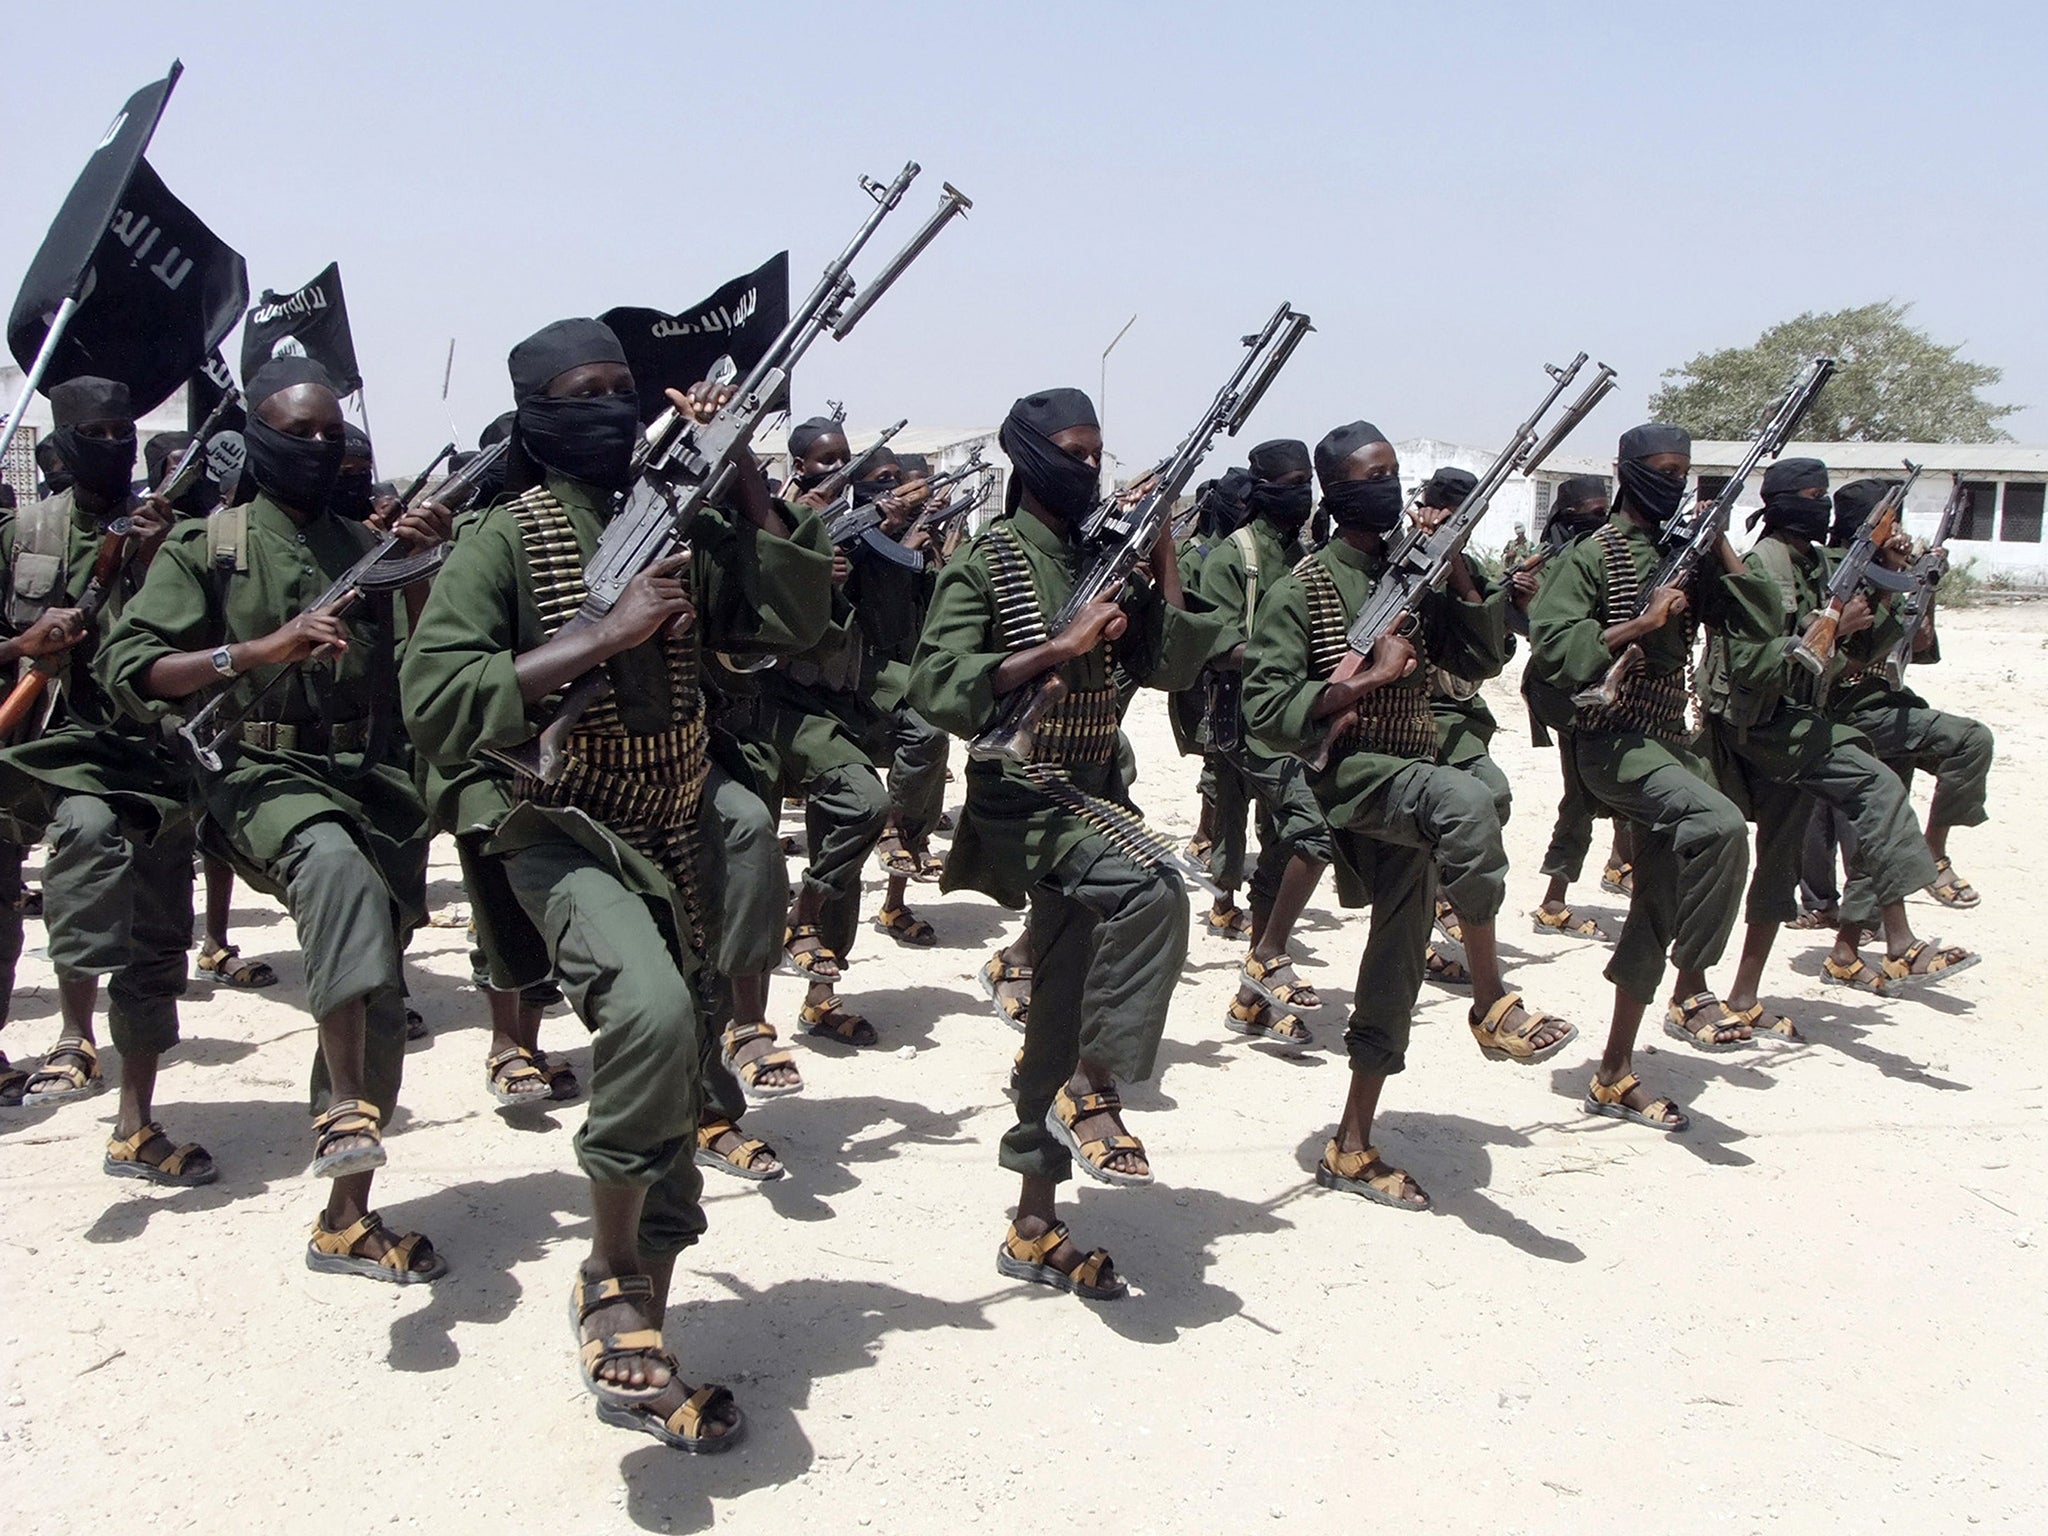 Hundreds of newly trained al-Shabab fighters perform military exercises